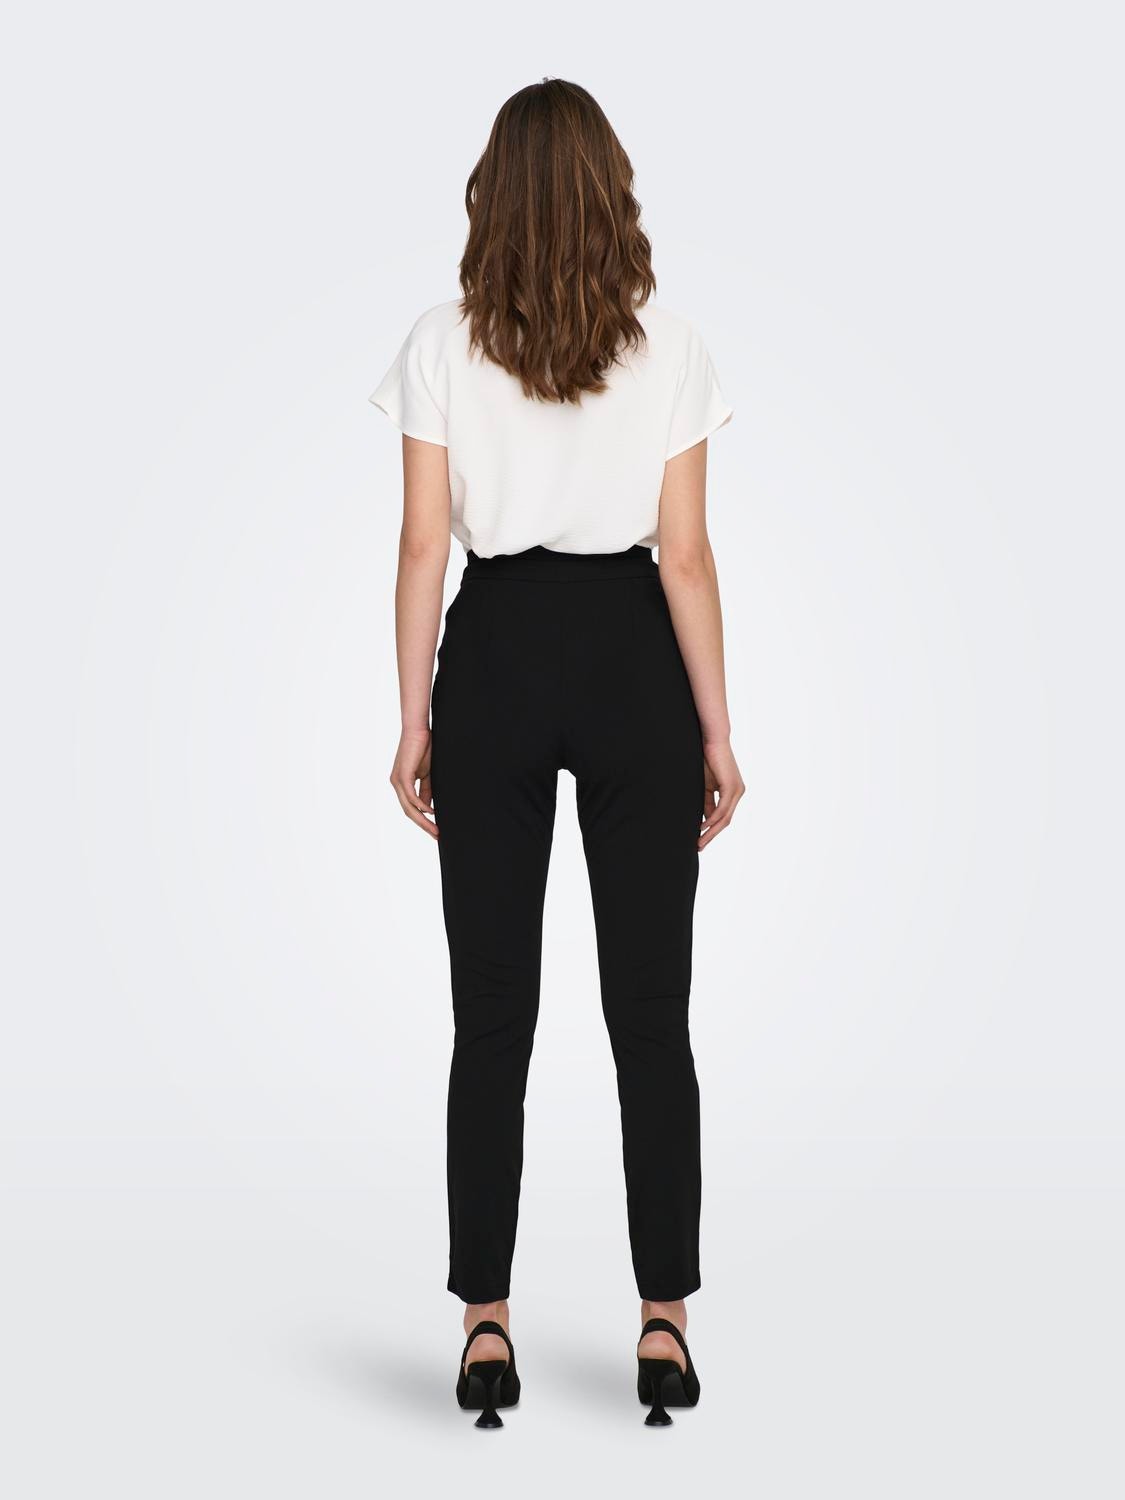 ONLY Classic Trousers -Black - 15205820